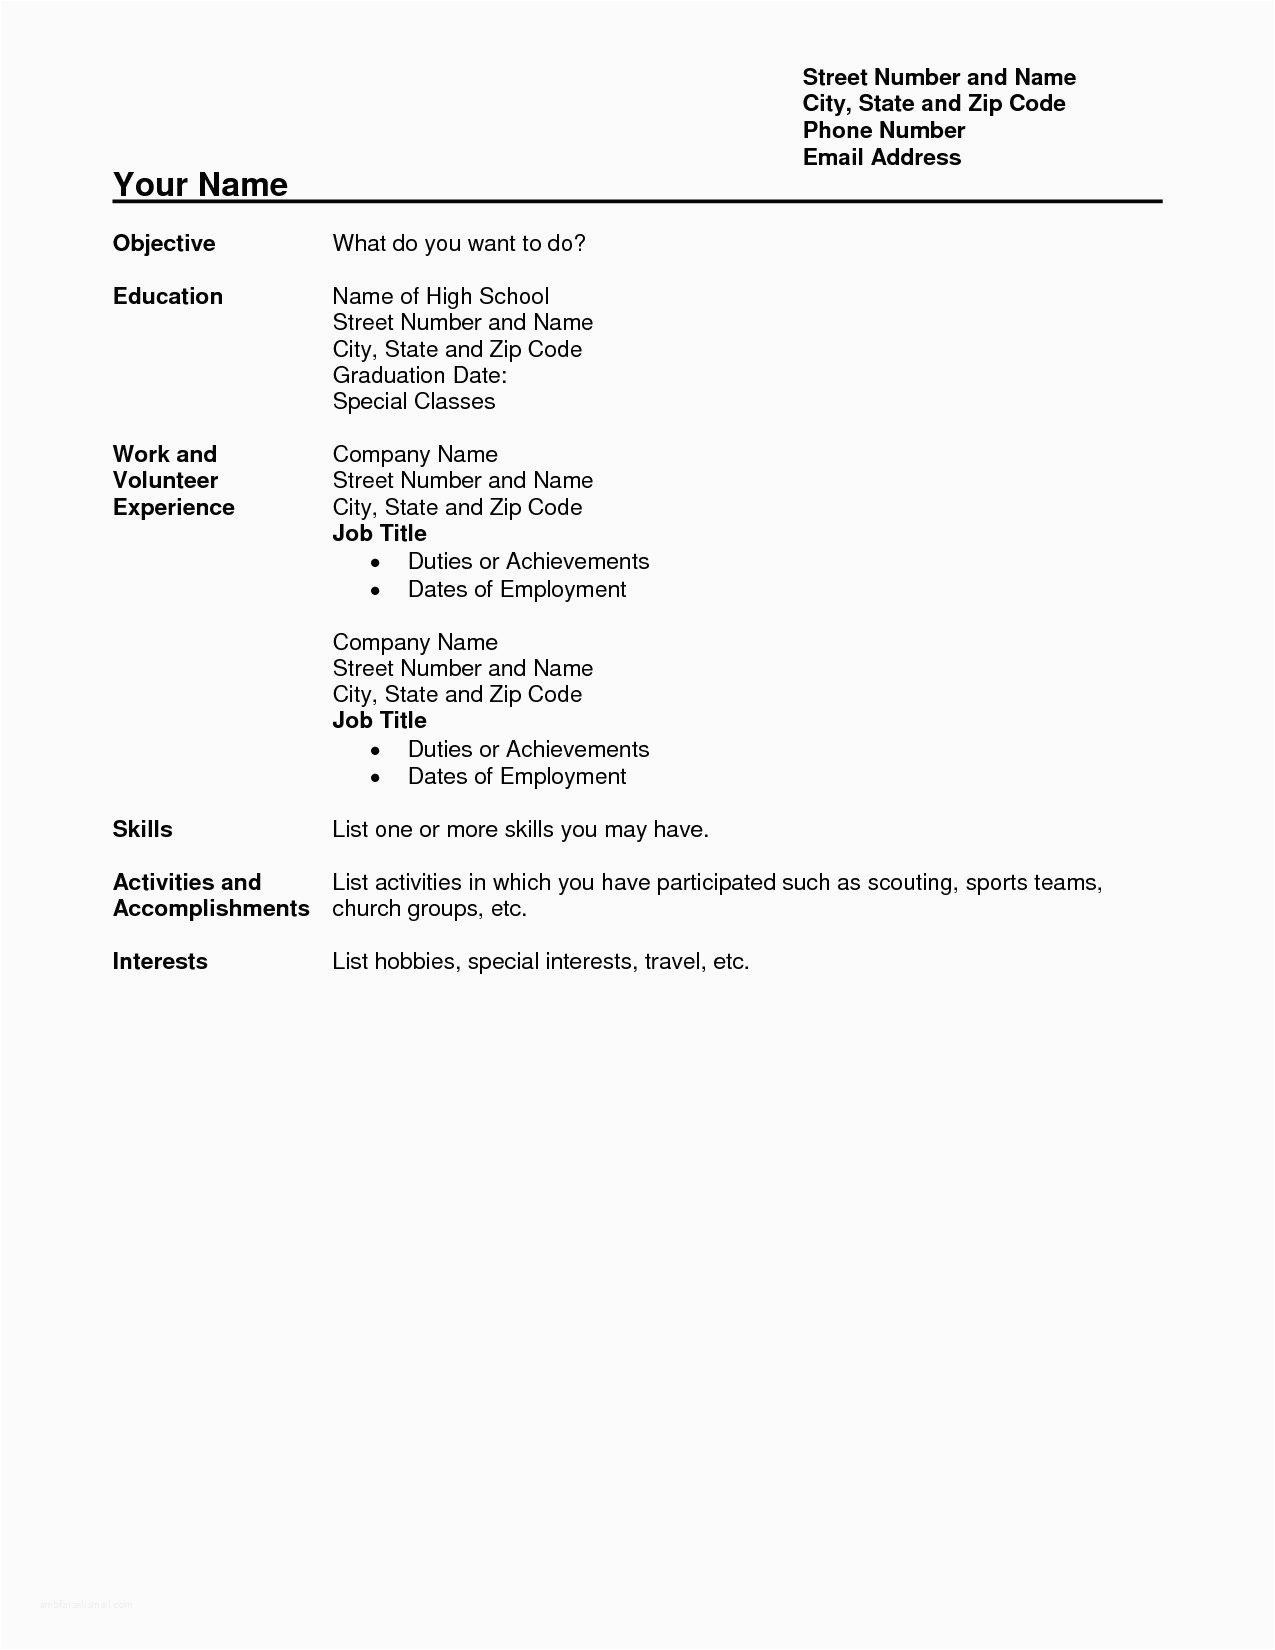 Sample Resume for Highschool Graduate with No Experience 8 9 Resumes for High School Graduates Aikenexplorer